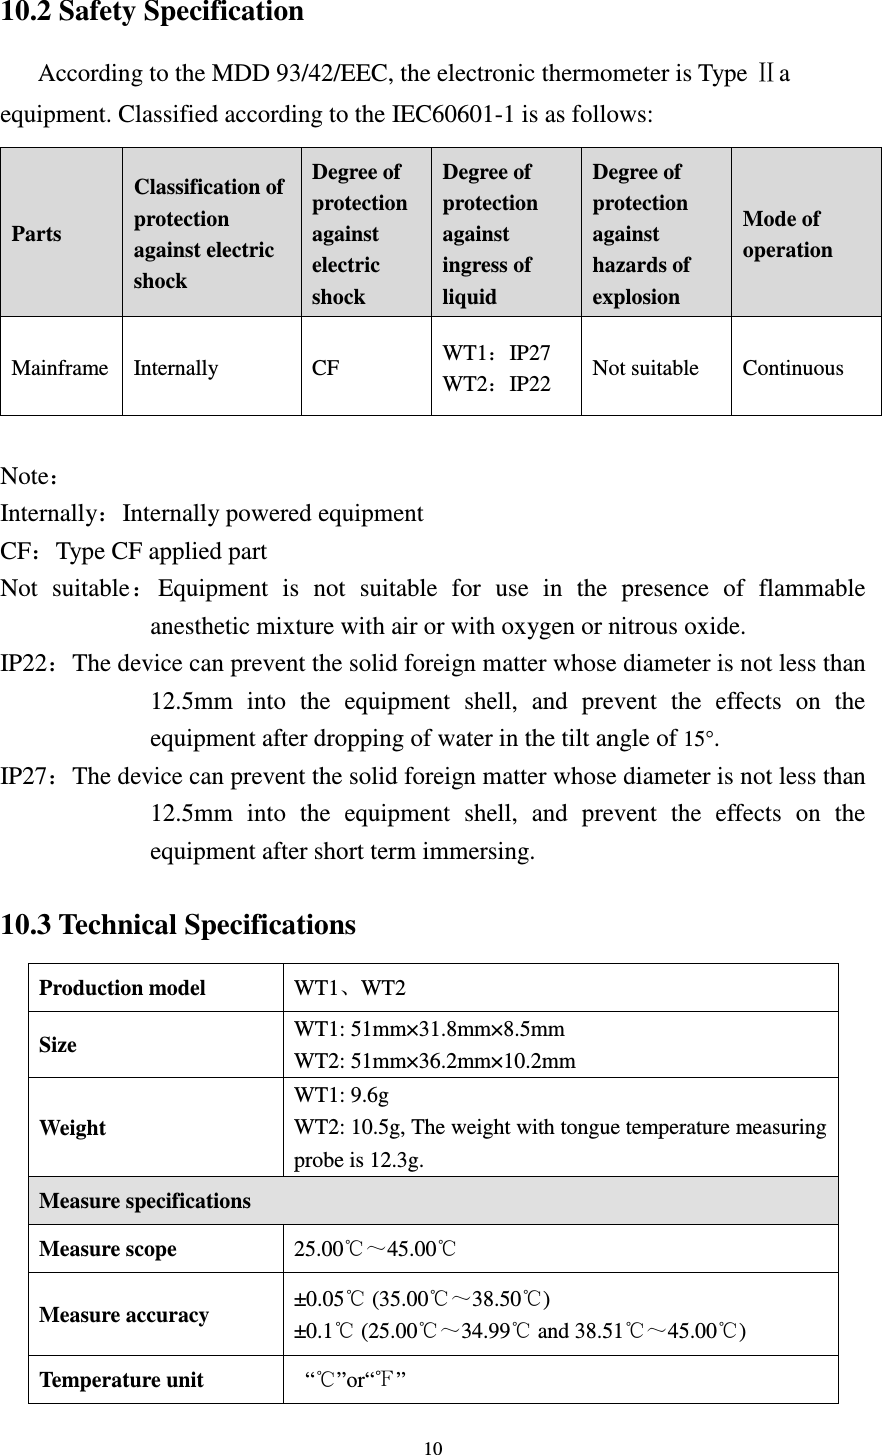 10  10.2 Safety Specification According to the MDD 93/42/EEC, the electronic thermometer is Type Ⅱa equipment. Classified according to the IEC60601-1 is as follows: Parts Classification of protection against electric shock Degree of protection against electric shock Degree of protection against ingress of liquid Degree of protection against hazards of explosion Mode of operation Mainframe Internally   CF WT1：IP27 WT2：IP22 Not suitable Continuous  Note： Internally：Internally powered equipment CF：Type CF applied part Not  suitable：Equipment  is  not  suitable  for  use  in  the  presence  of  flammable anesthetic mixture with air or with oxygen or nitrous oxide. IP22：The device can prevent the solid foreign matter whose diameter is not less than 12.5mm  into  the  equipment  shell,  and  prevent  the  effects  on  the equipment after dropping of water in the tilt angle of 15°. IP27：The device can prevent the solid foreign matter whose diameter is not less than 12.5mm  into  the  equipment  shell,  and  prevent  the  effects  on  the equipment after short term immersing.  10.3 Technical Specifications Production model  WT1、WT2 Size    WT1: 51mm×31.8mm×8.5mm WT2: 51mm×36.2mm×10.2mm Weight   WT1: 9.6g WT2: 10.5g, The weight with tongue temperature measuring probe is 12.3g. Measure specifications   Measure scope  25.00℃～45.00℃ Measure accuracy  ±0.05℃ (35.00℃～38.50 )℃ ±0.1℃ (25.00℃～34.99  and ℃38.51℃～45.00 )℃ Temperature unit    “℃”or“℉” 